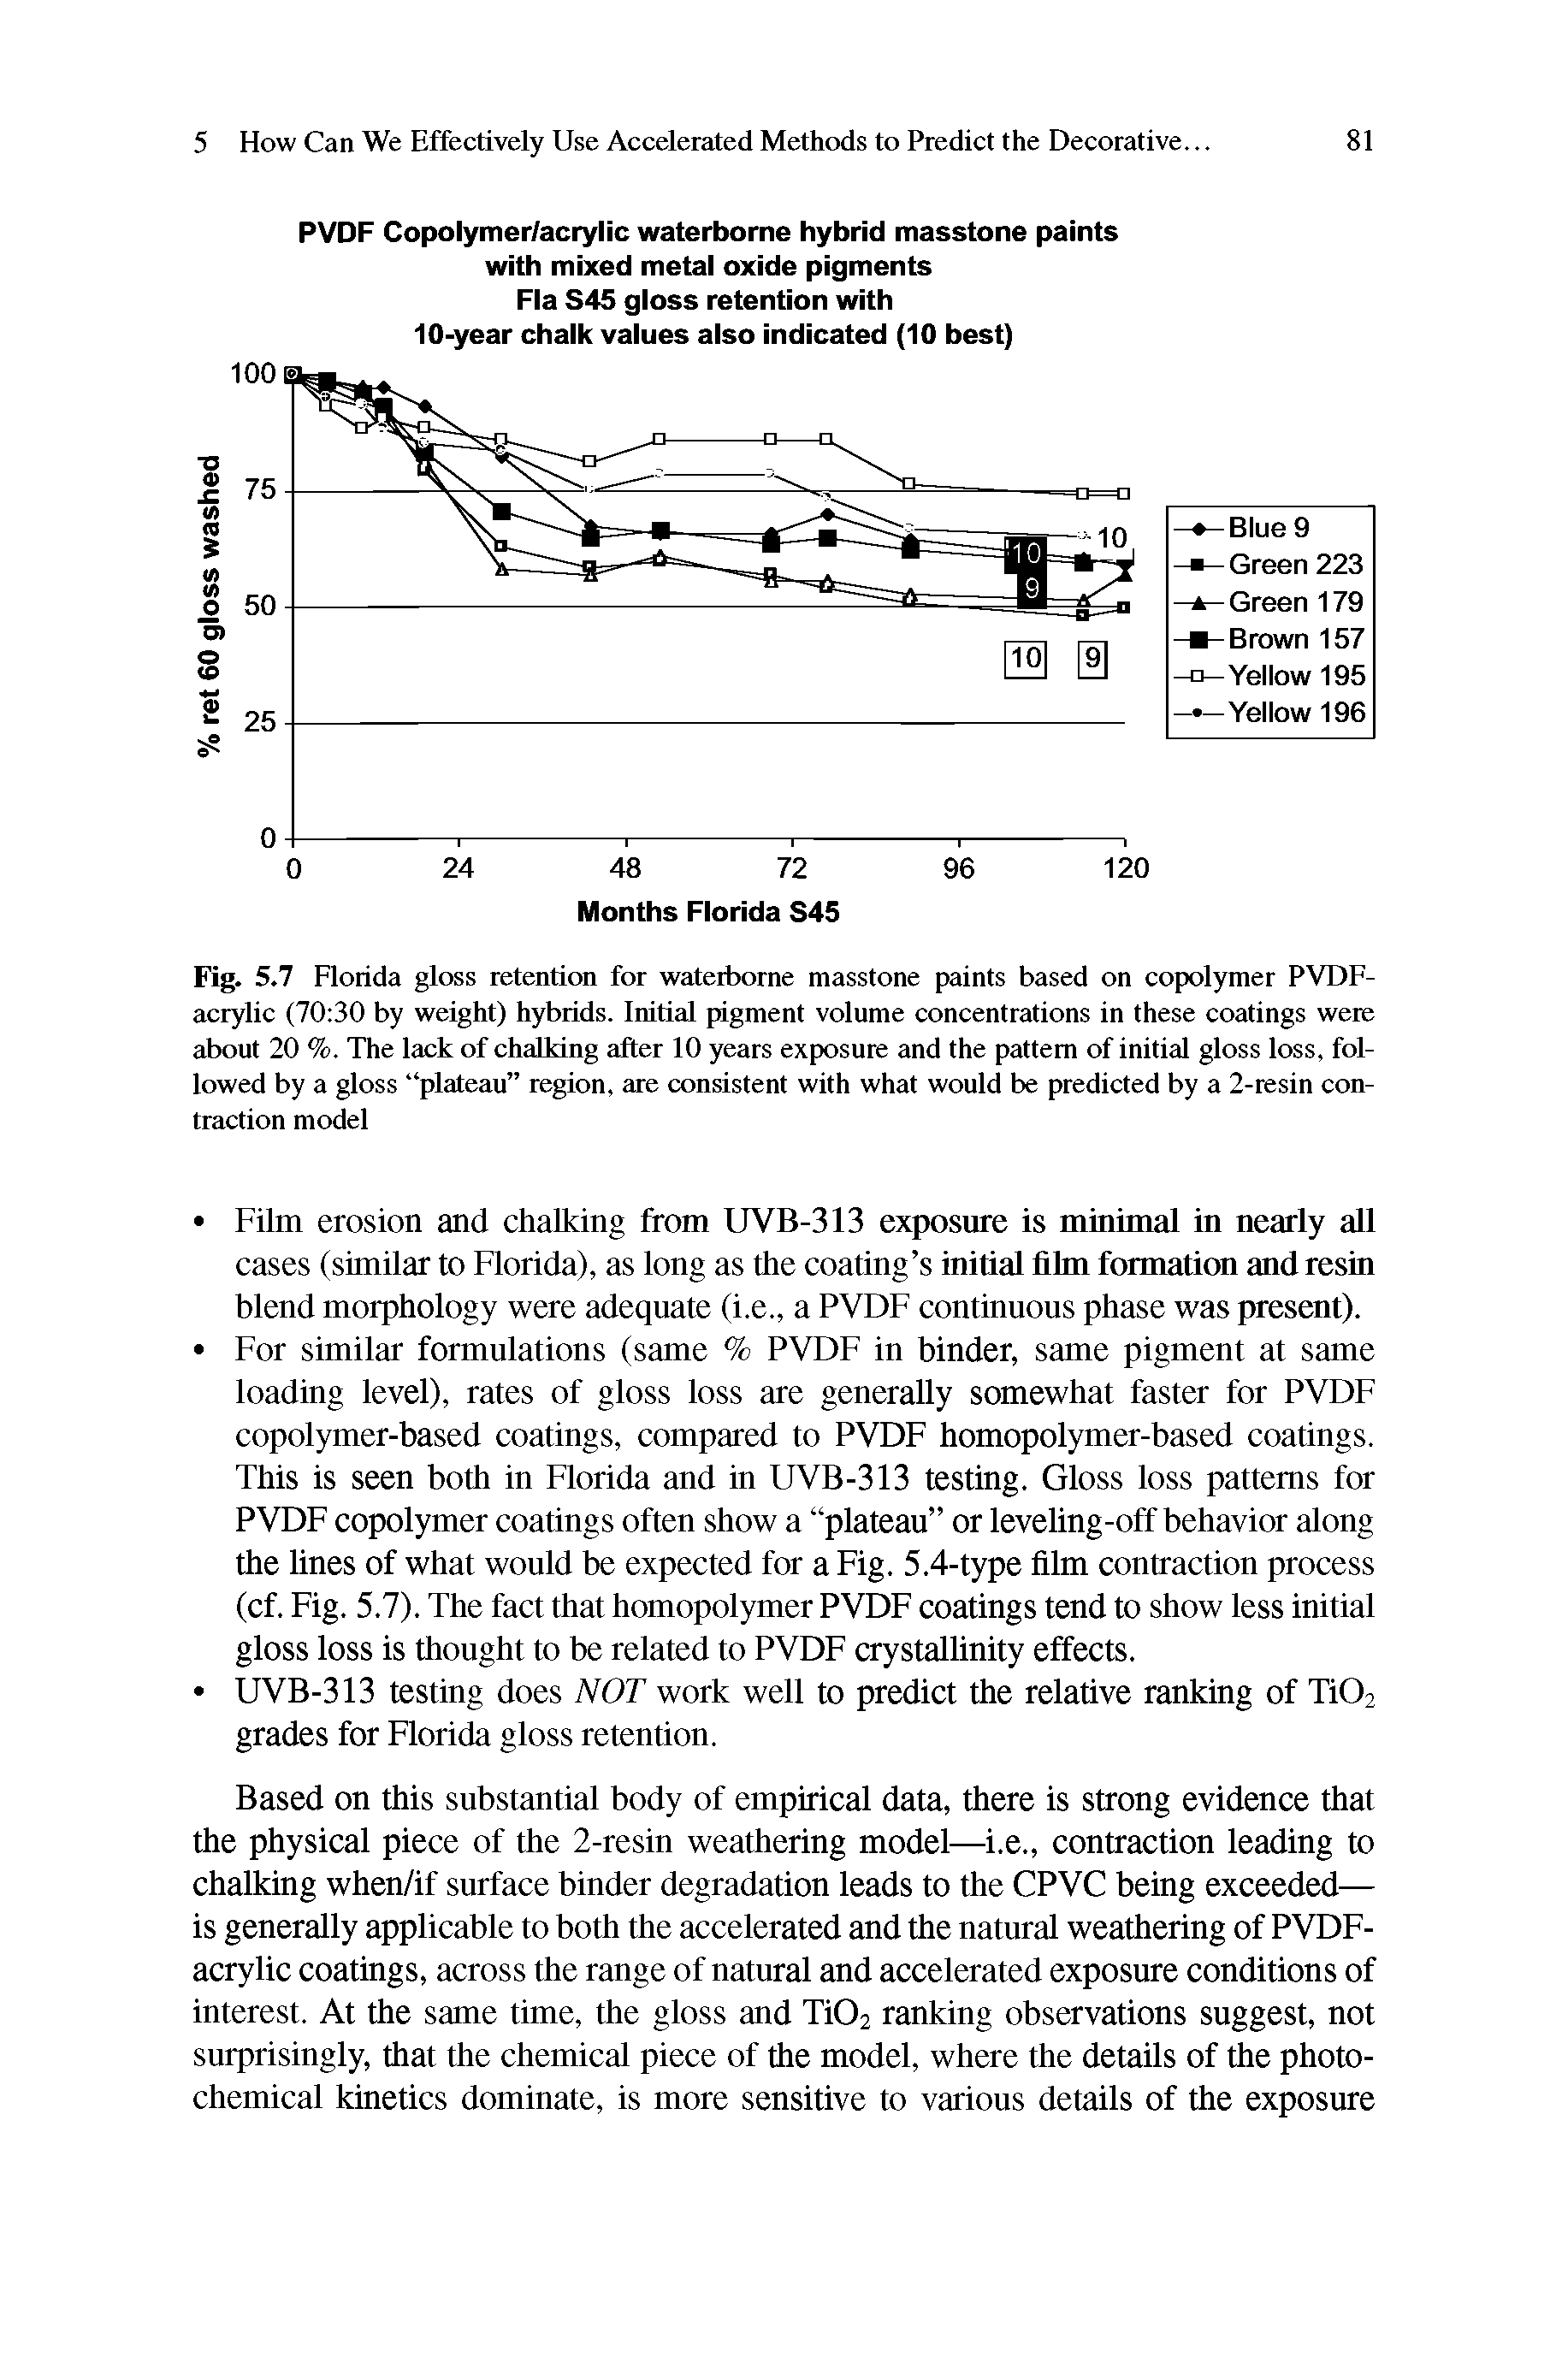 Fig. 5.7 Florida gloss retention for waterborne masstone paints based on copolymer PVDF-acrylic (70 30 by weight) hybrids. Initial pigment volume concentrations in these coatings were about 20 %. The lack of chaUdng after 10 years exposure and the pattern of initial gloss loss, followed by a gloss plateau region, are consistent with what would be predicted by a 2-resin contraction model...